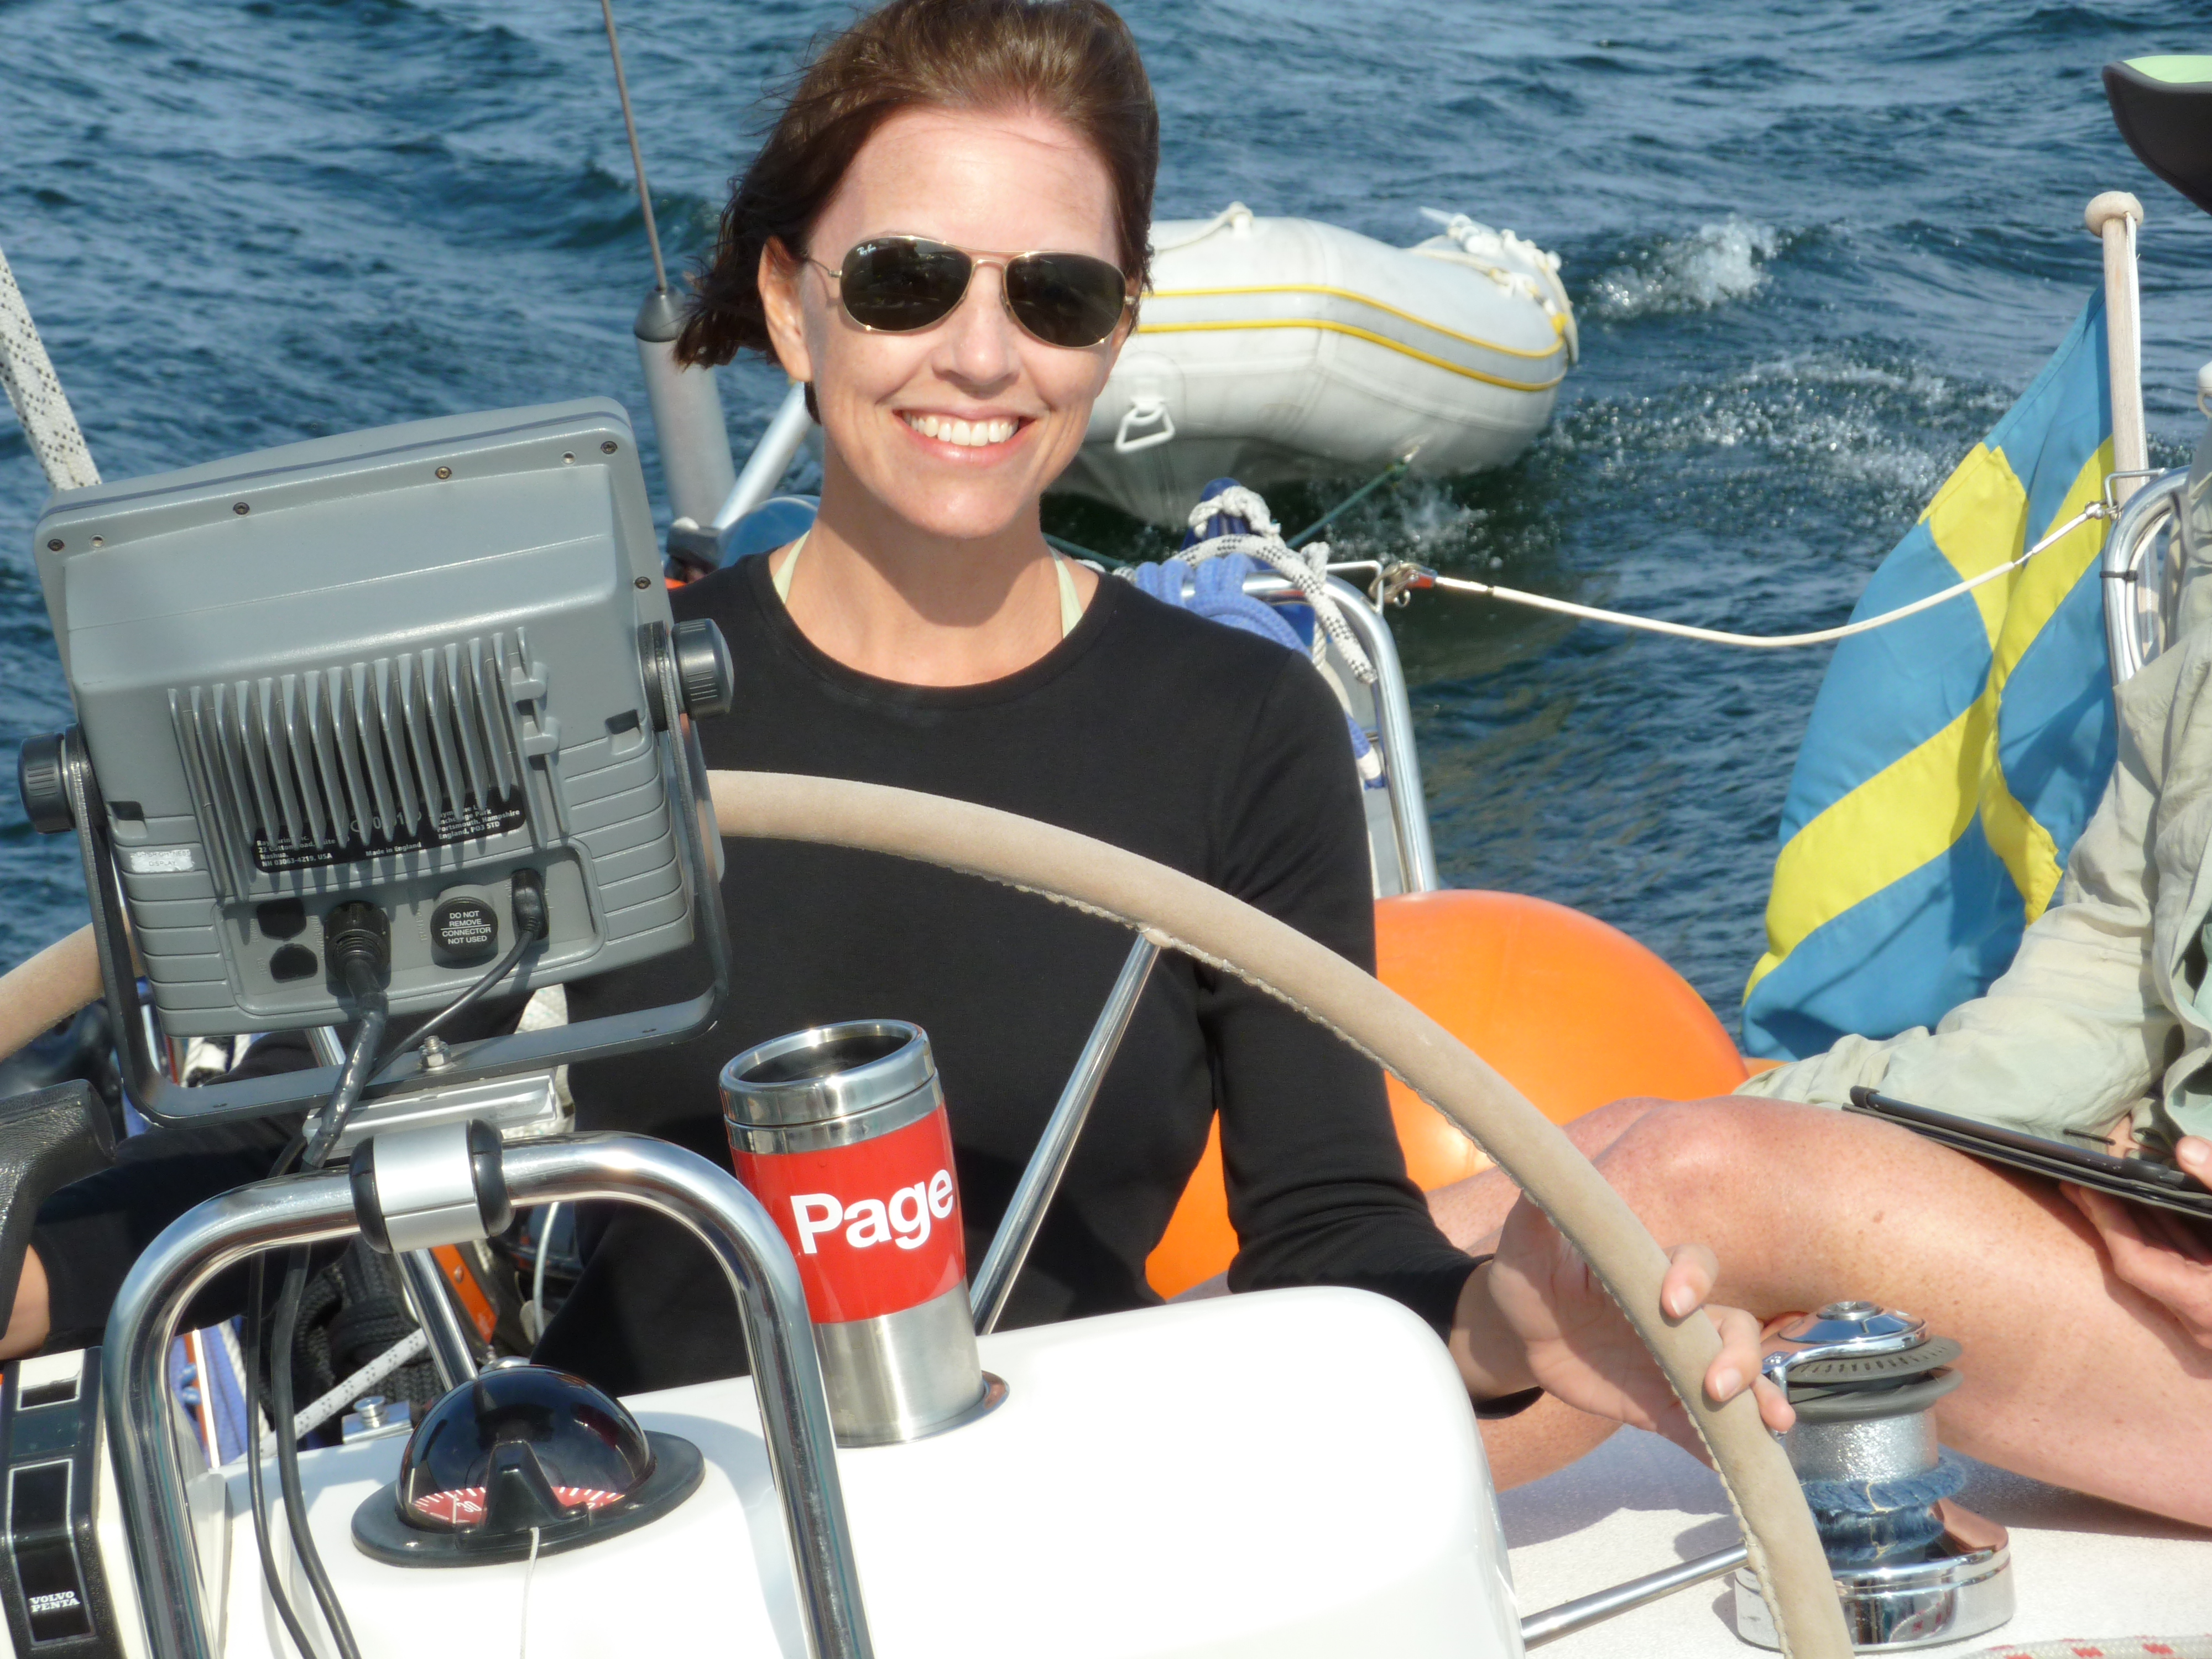 Sailing in a Swedish archipelago, one of her favorite family vacations.